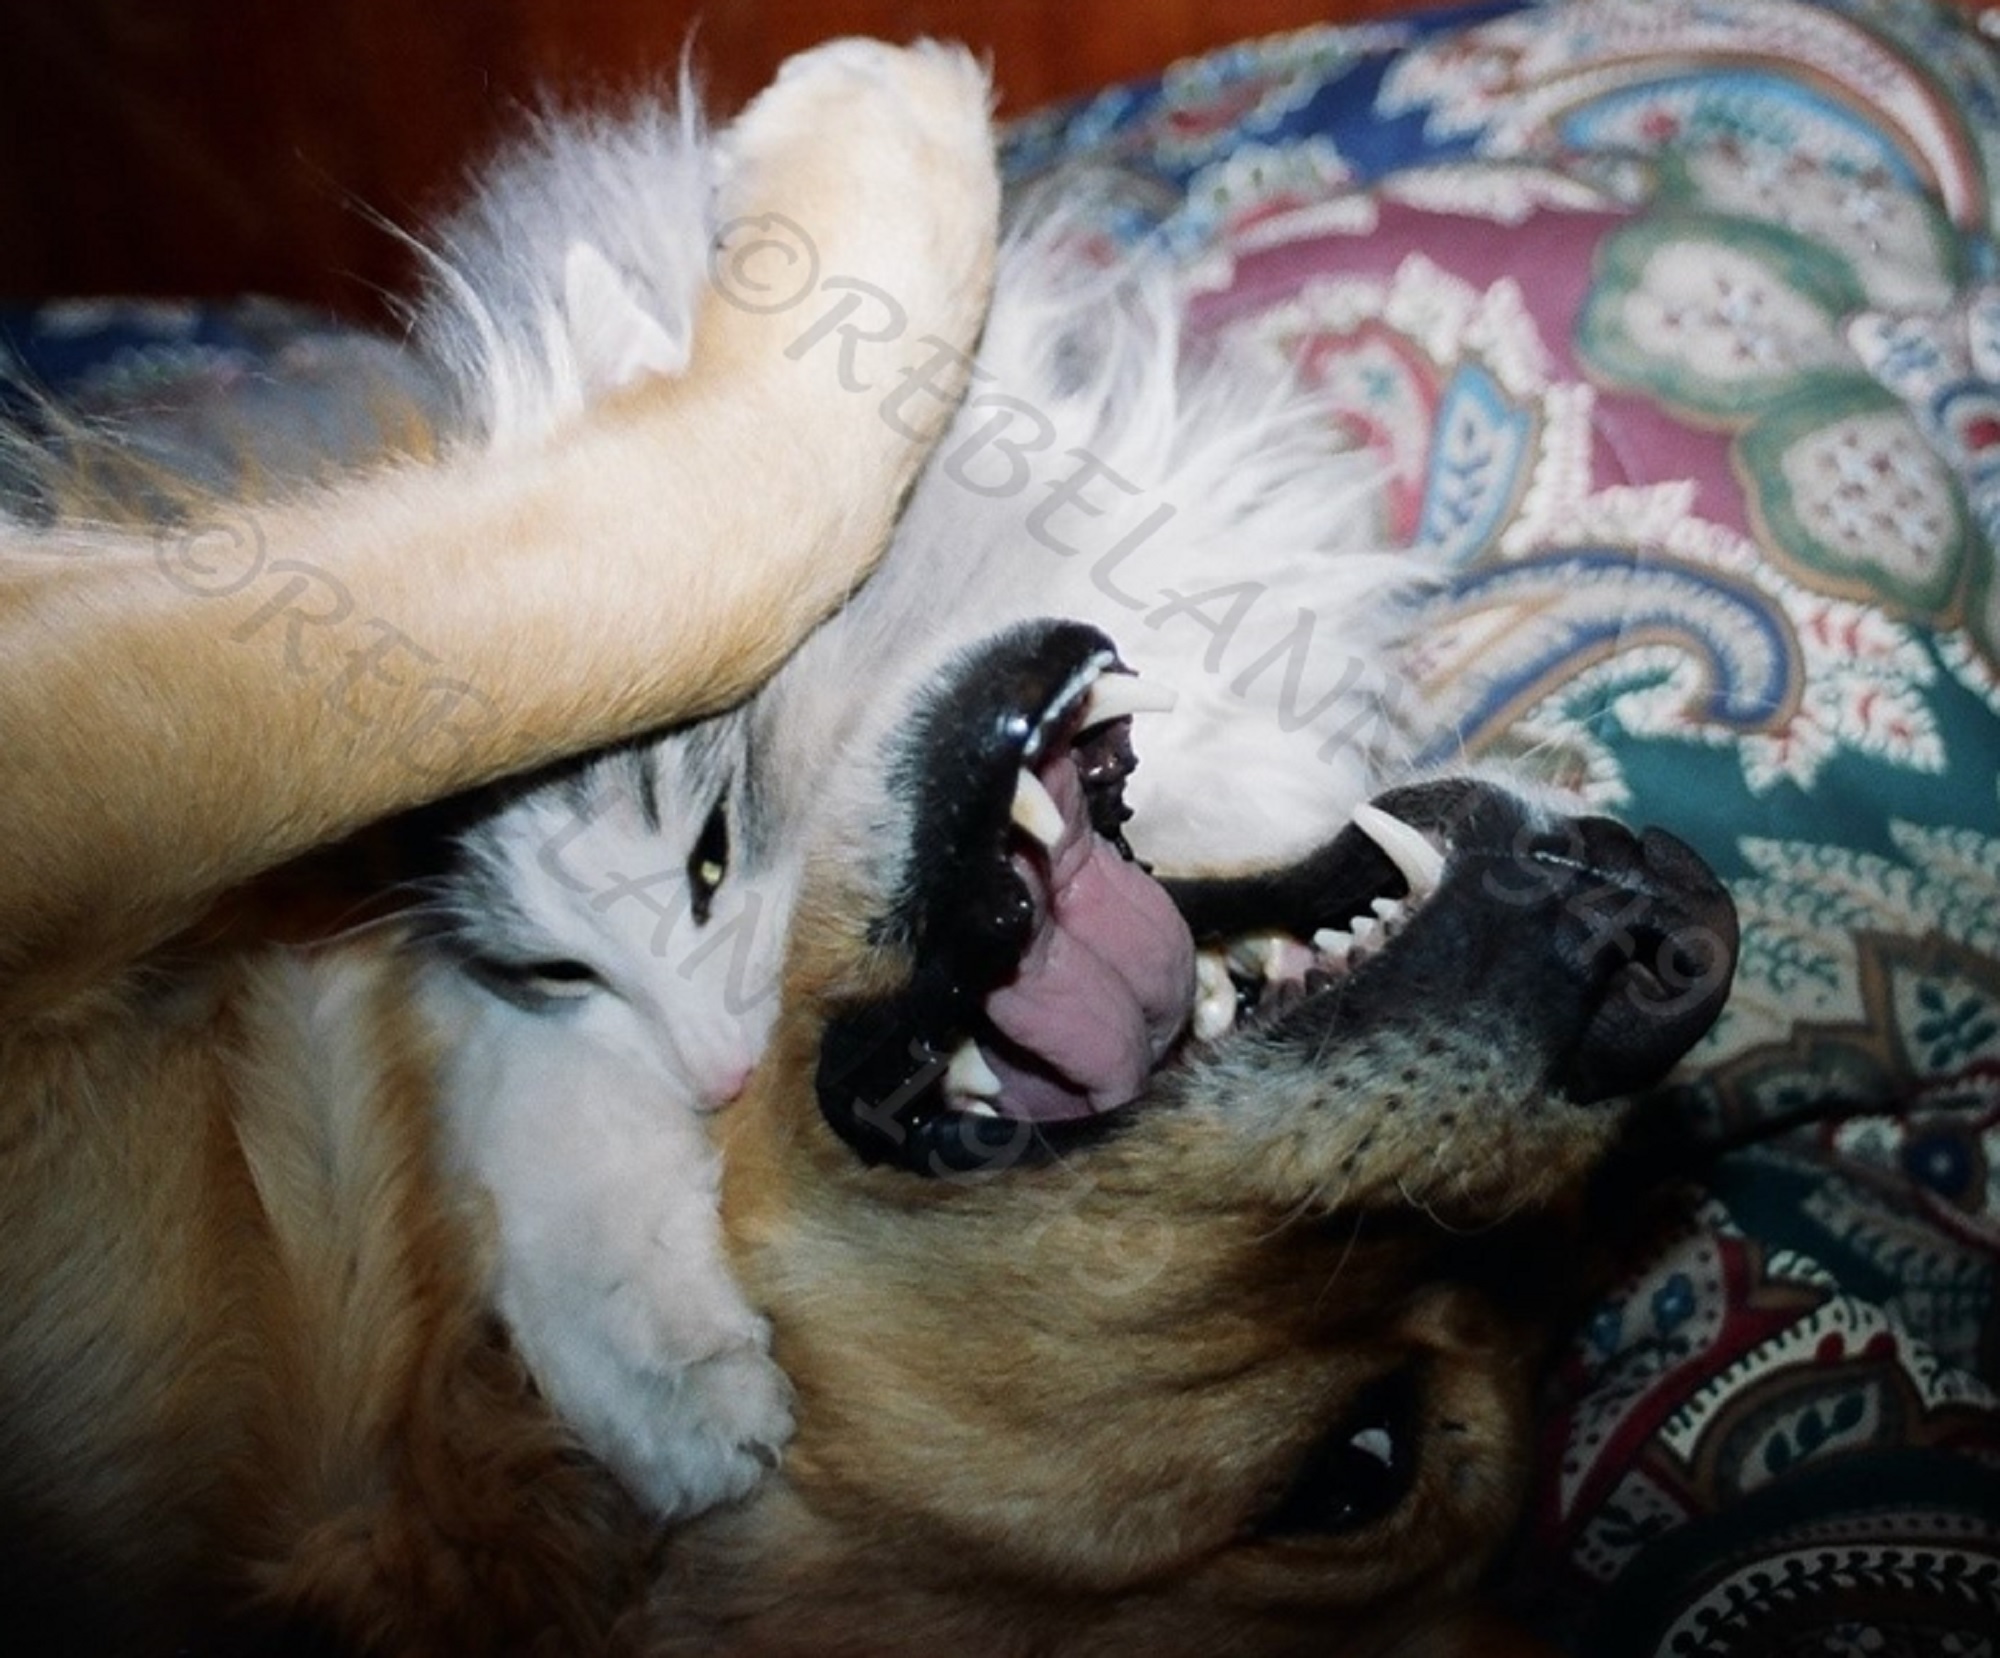 Gracie is losing the fight, Spunky had her by the throat ... I took this with a 35mm Nikon in the early 1990s